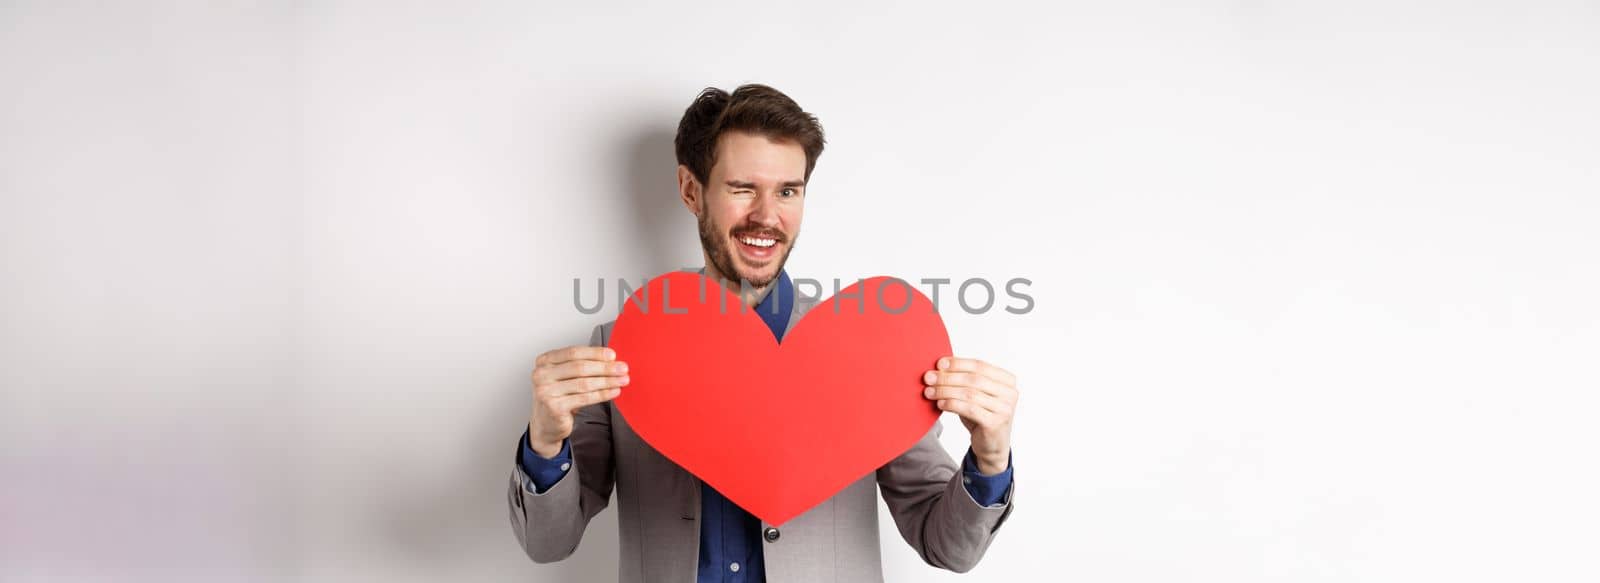 Charismatic young man winking and smiling, showing big red heart cutout for Valentines day date, say love you to lover, standing over white background.